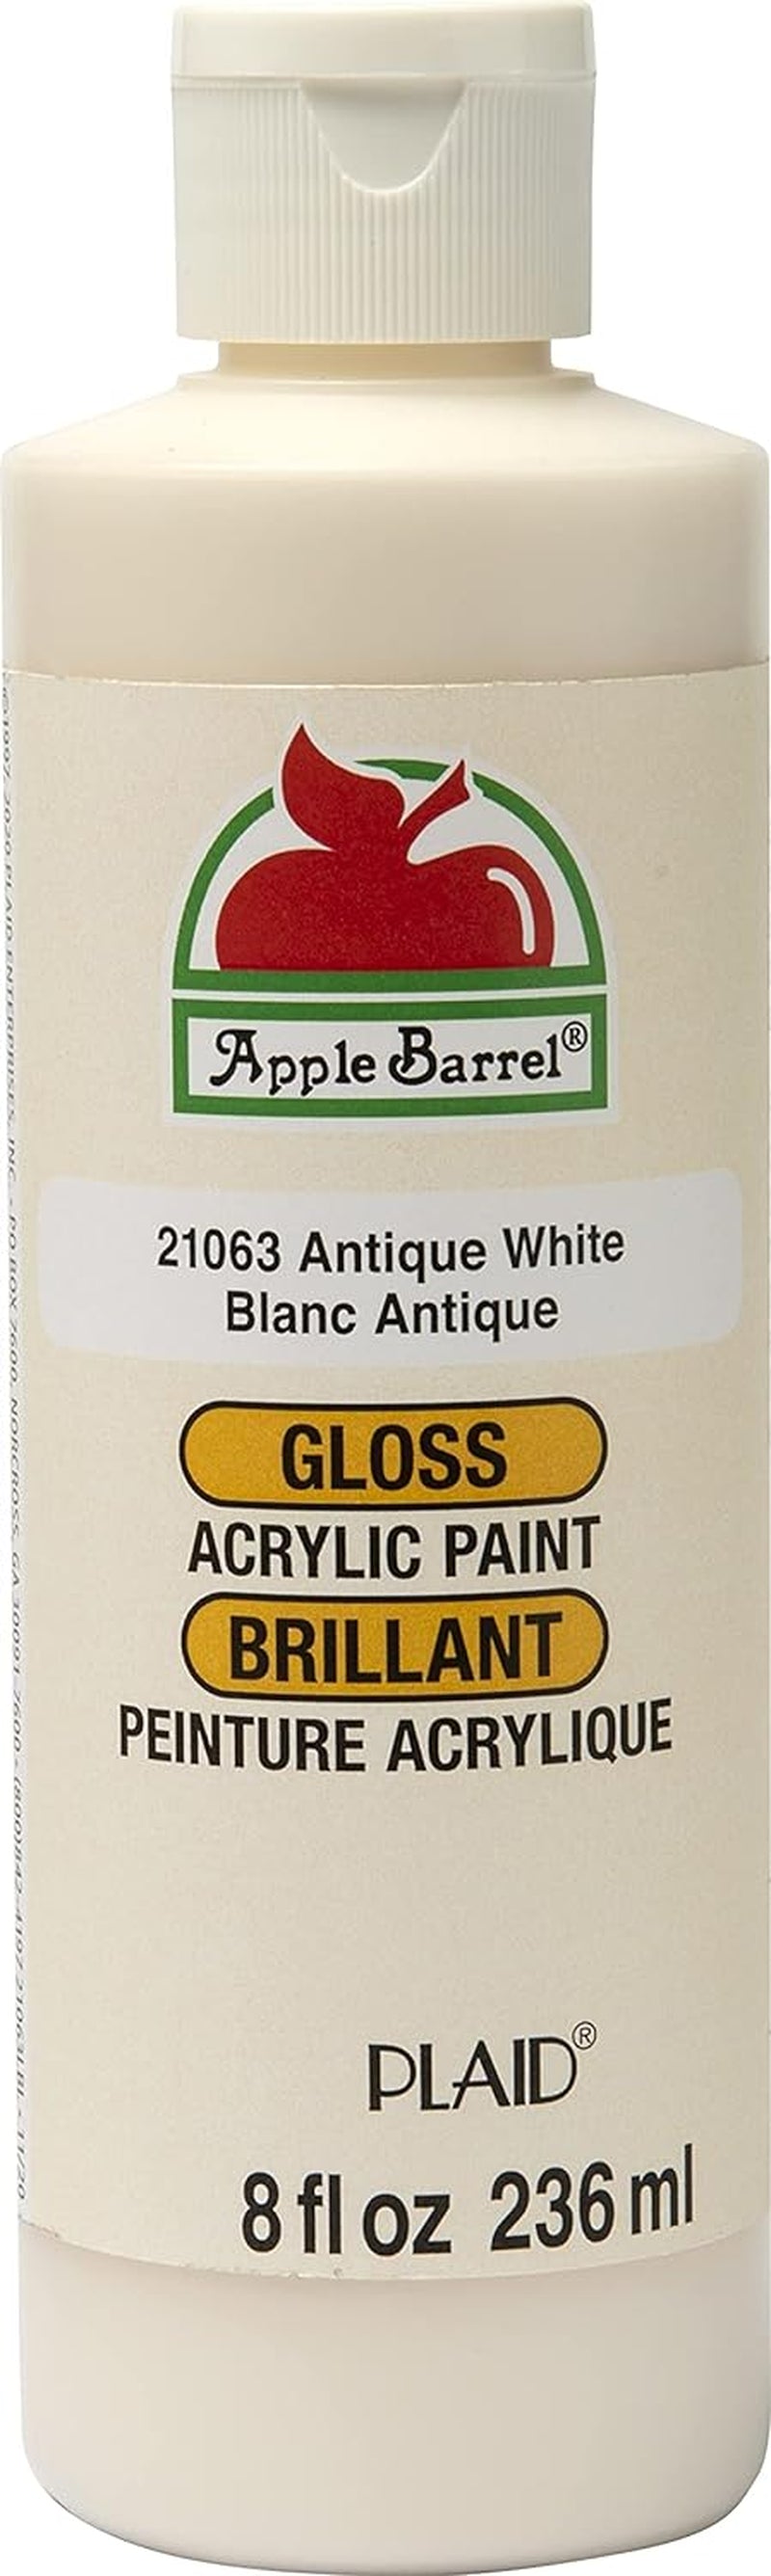 Apple Barrel Gloss Acrylic Paint in Assorted Colors (8 oz), 20408